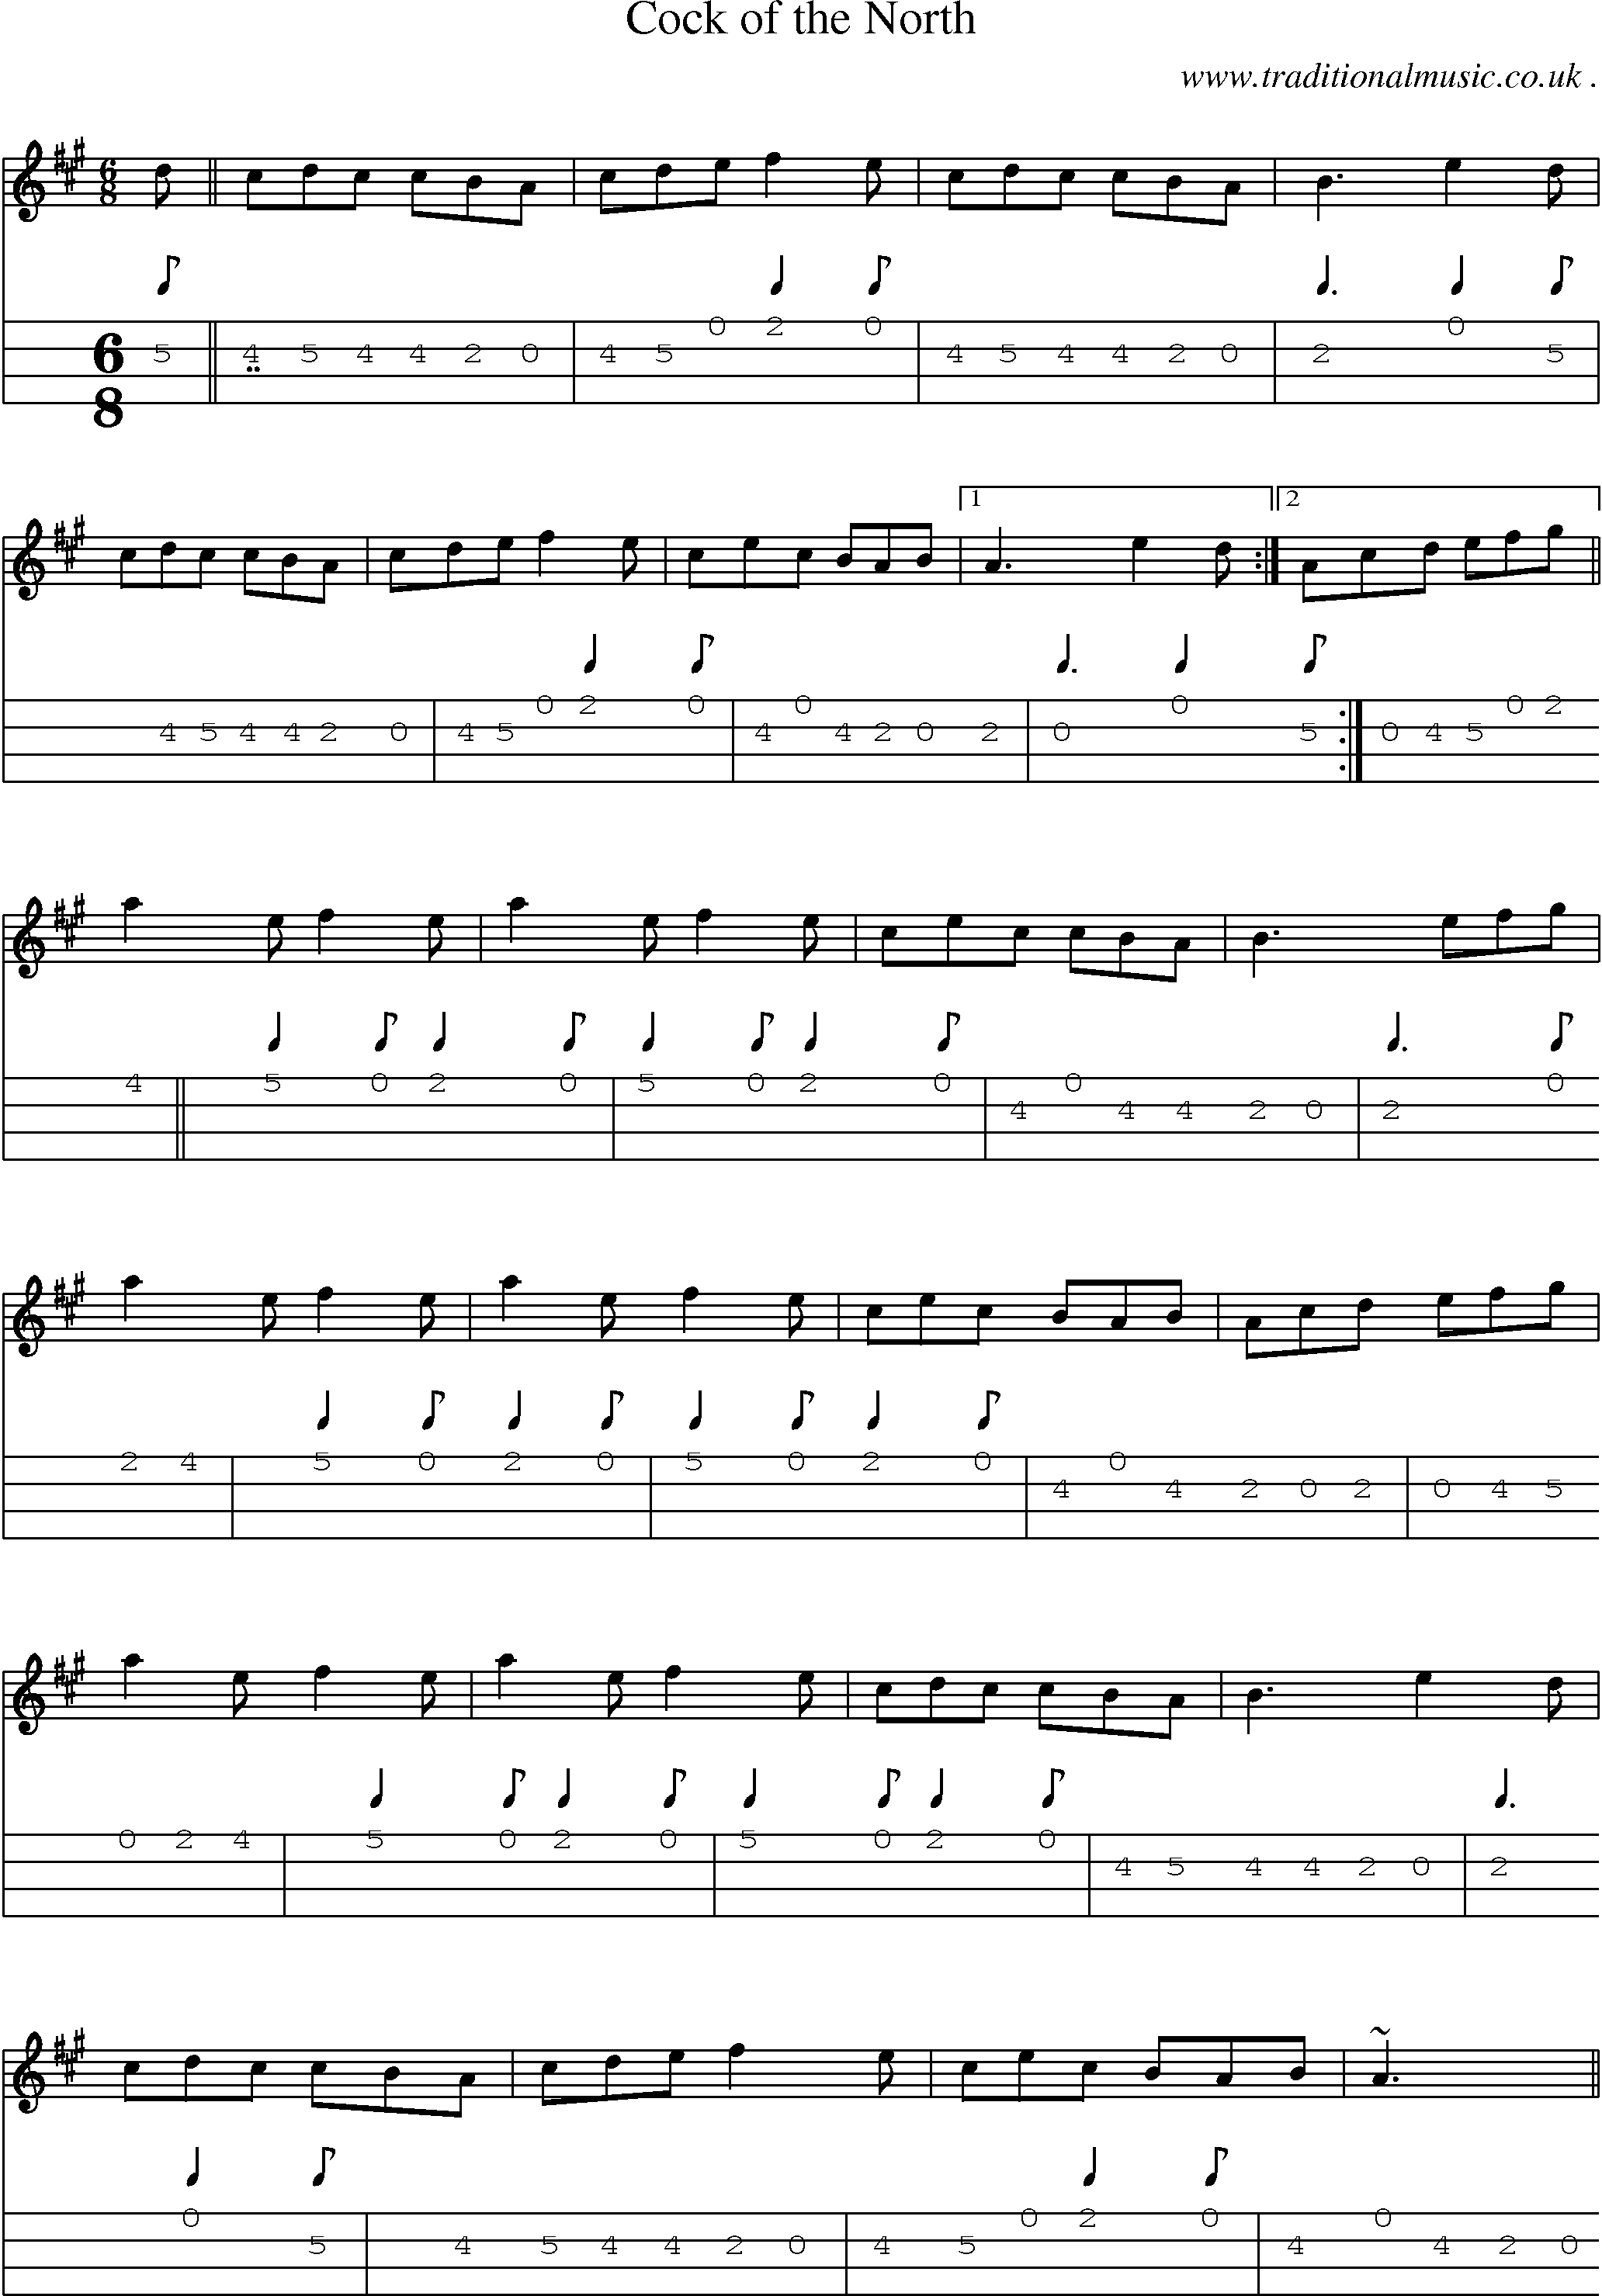 Sheet-music  score, Chords and Mandolin Tabs for Cock Of The North